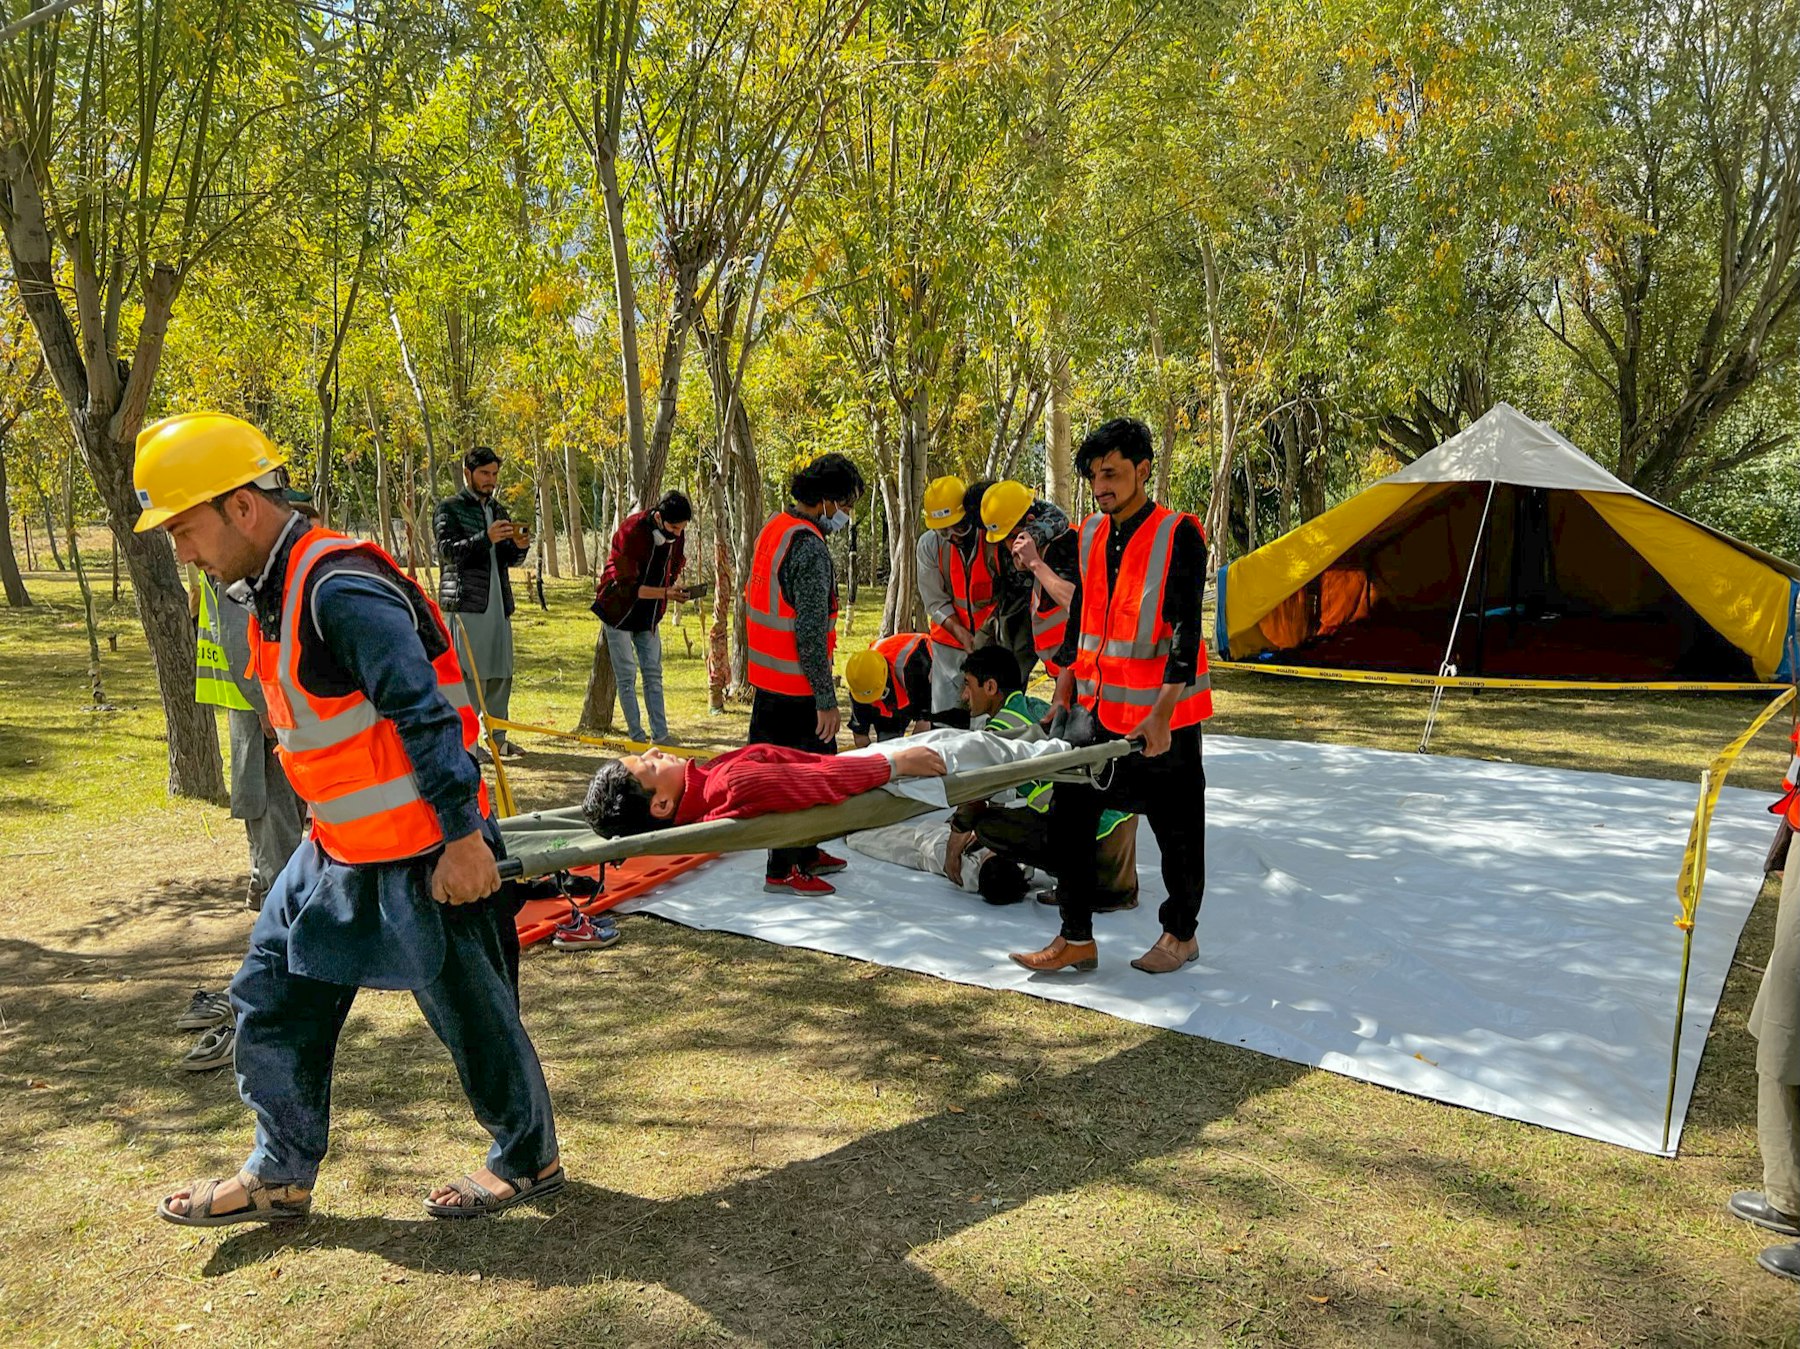 Community emergency response volunteers carry out a simulation using a stretcher.